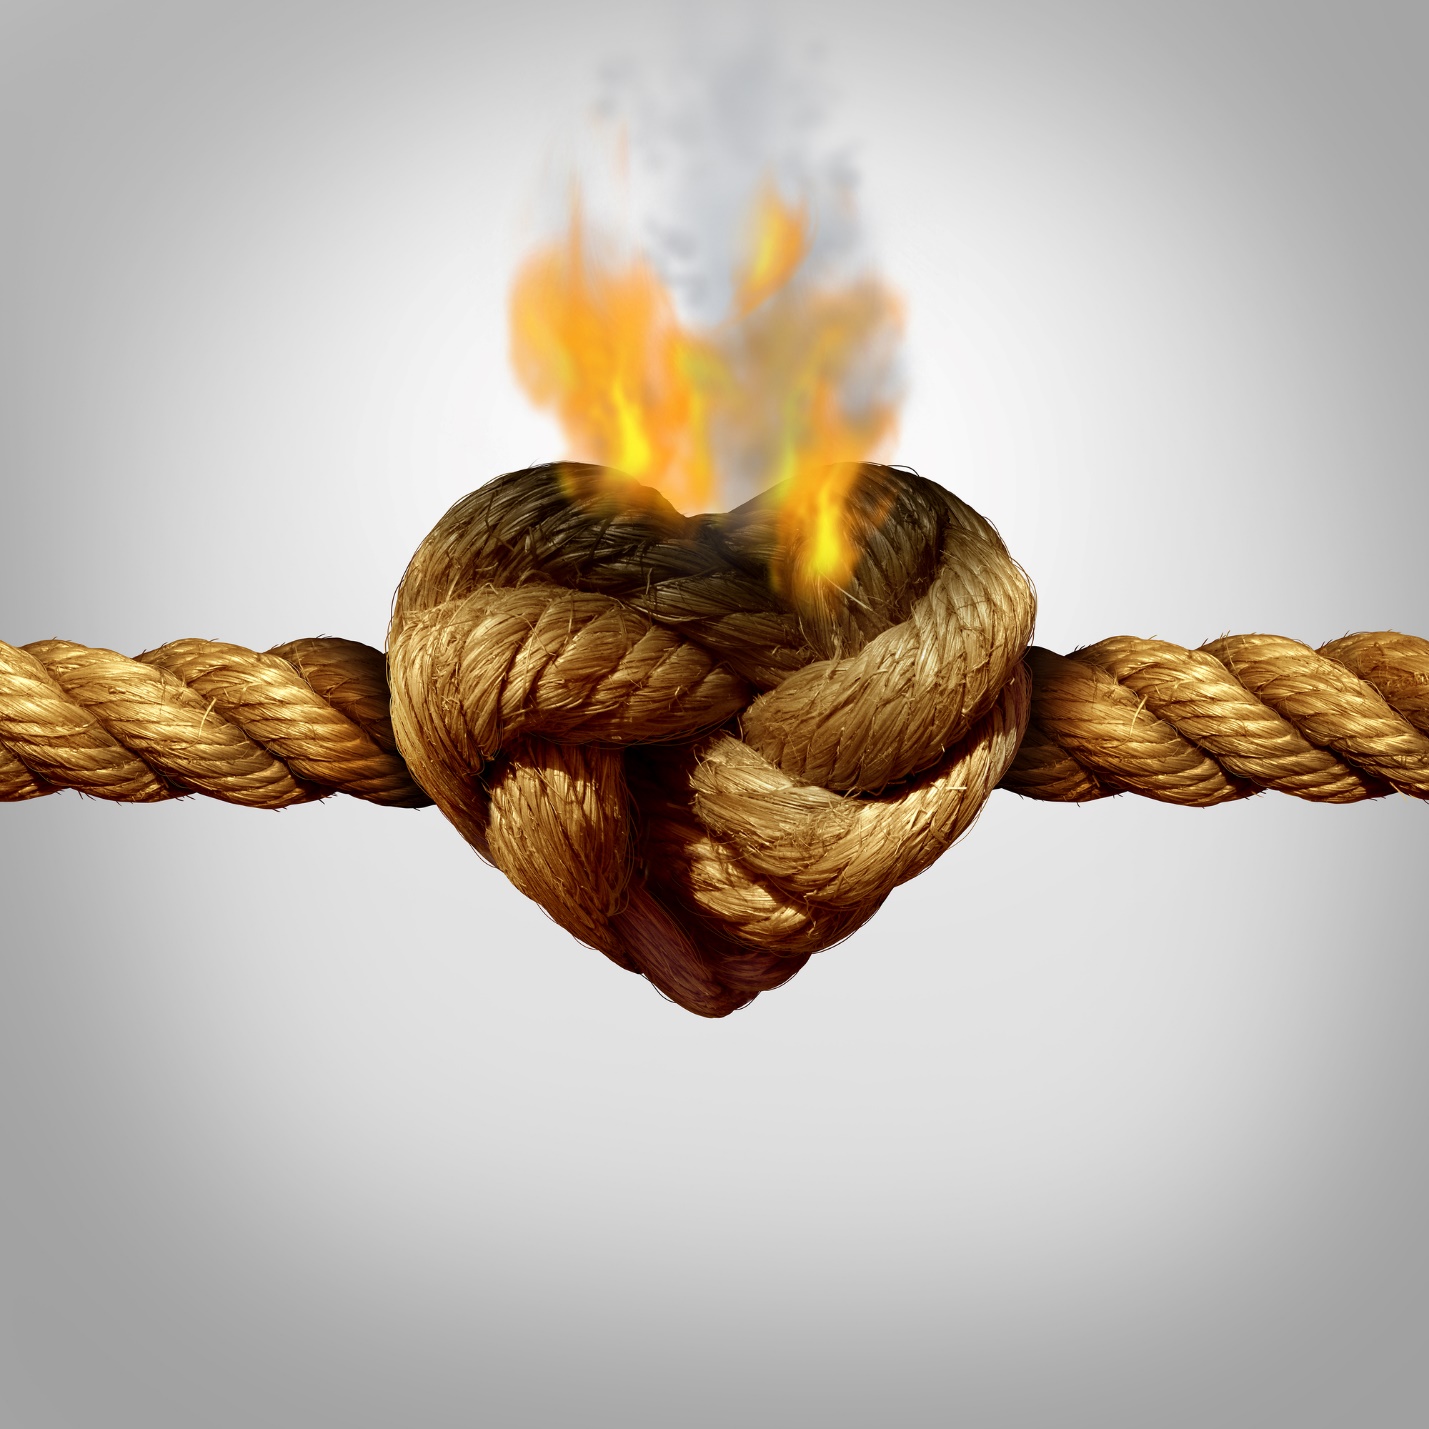 A picture containing rope, chain

Description automatically generated